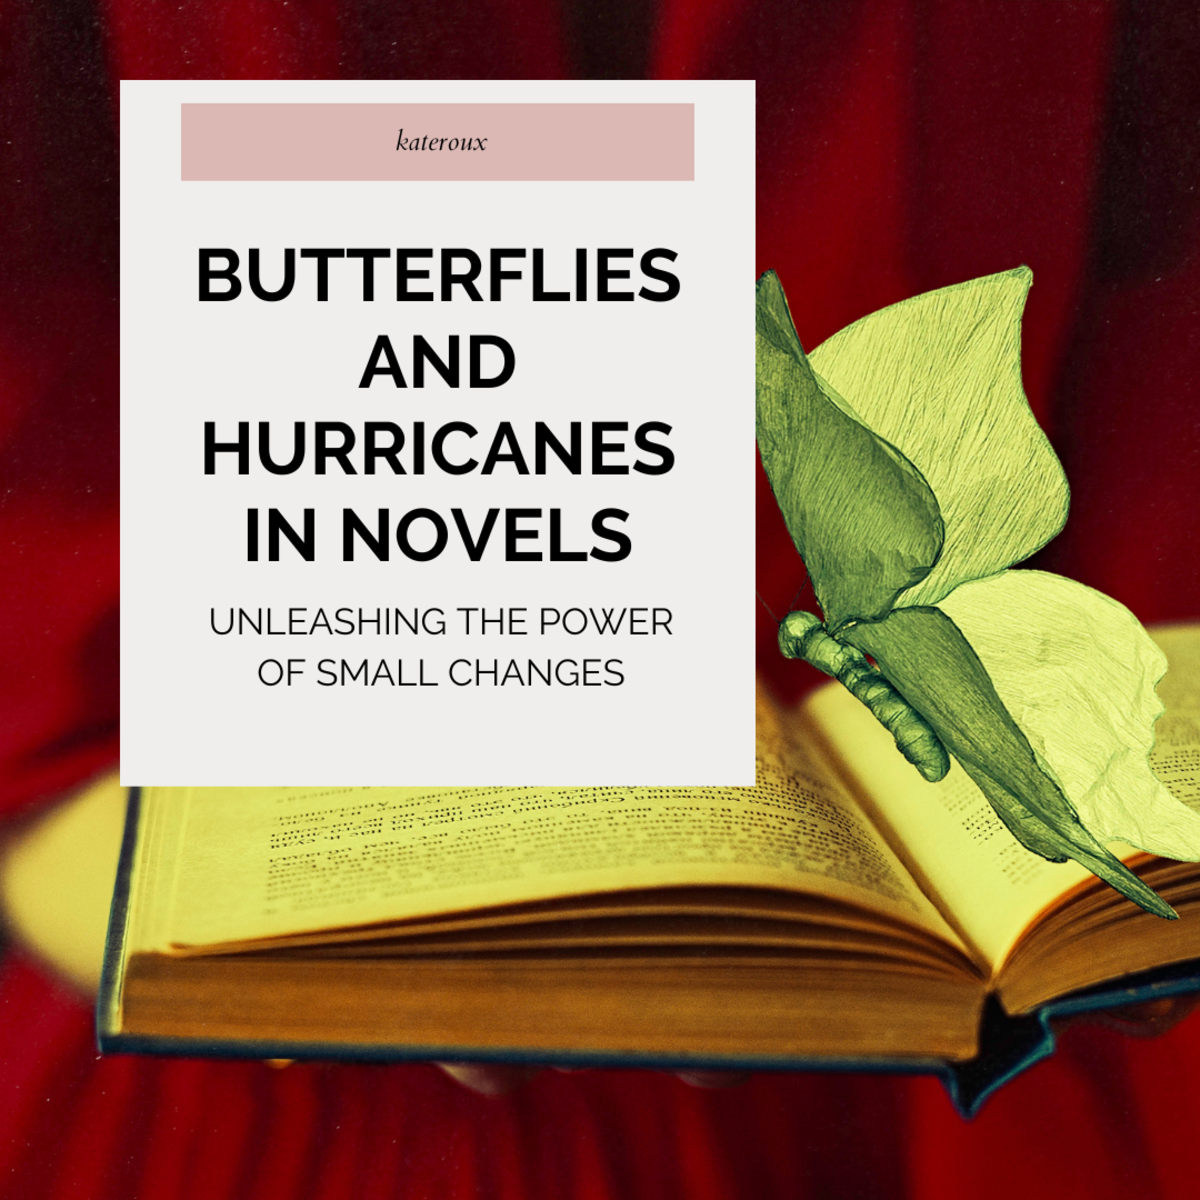 Butterflies and Hurricanes in Novels: Unleashing the Power of Small Changes